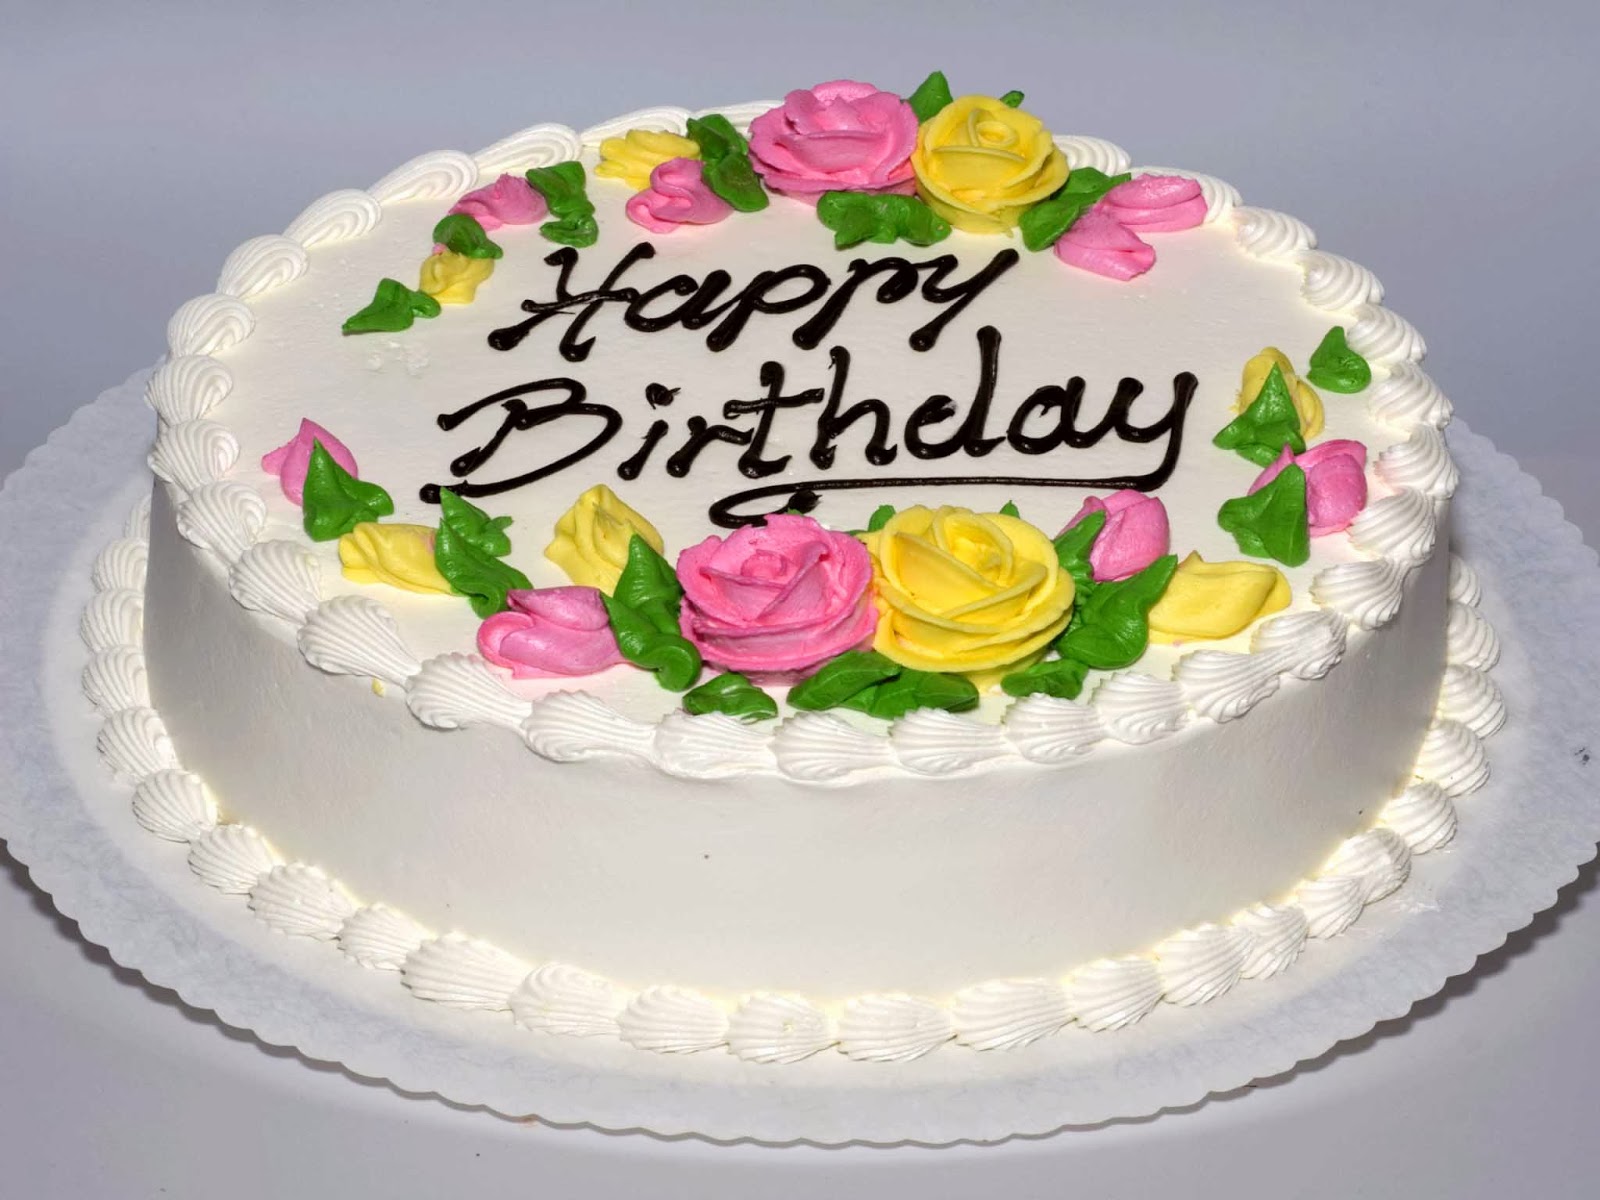 Lovable Images Happy Birthday Greetings Free Download Cake Happy